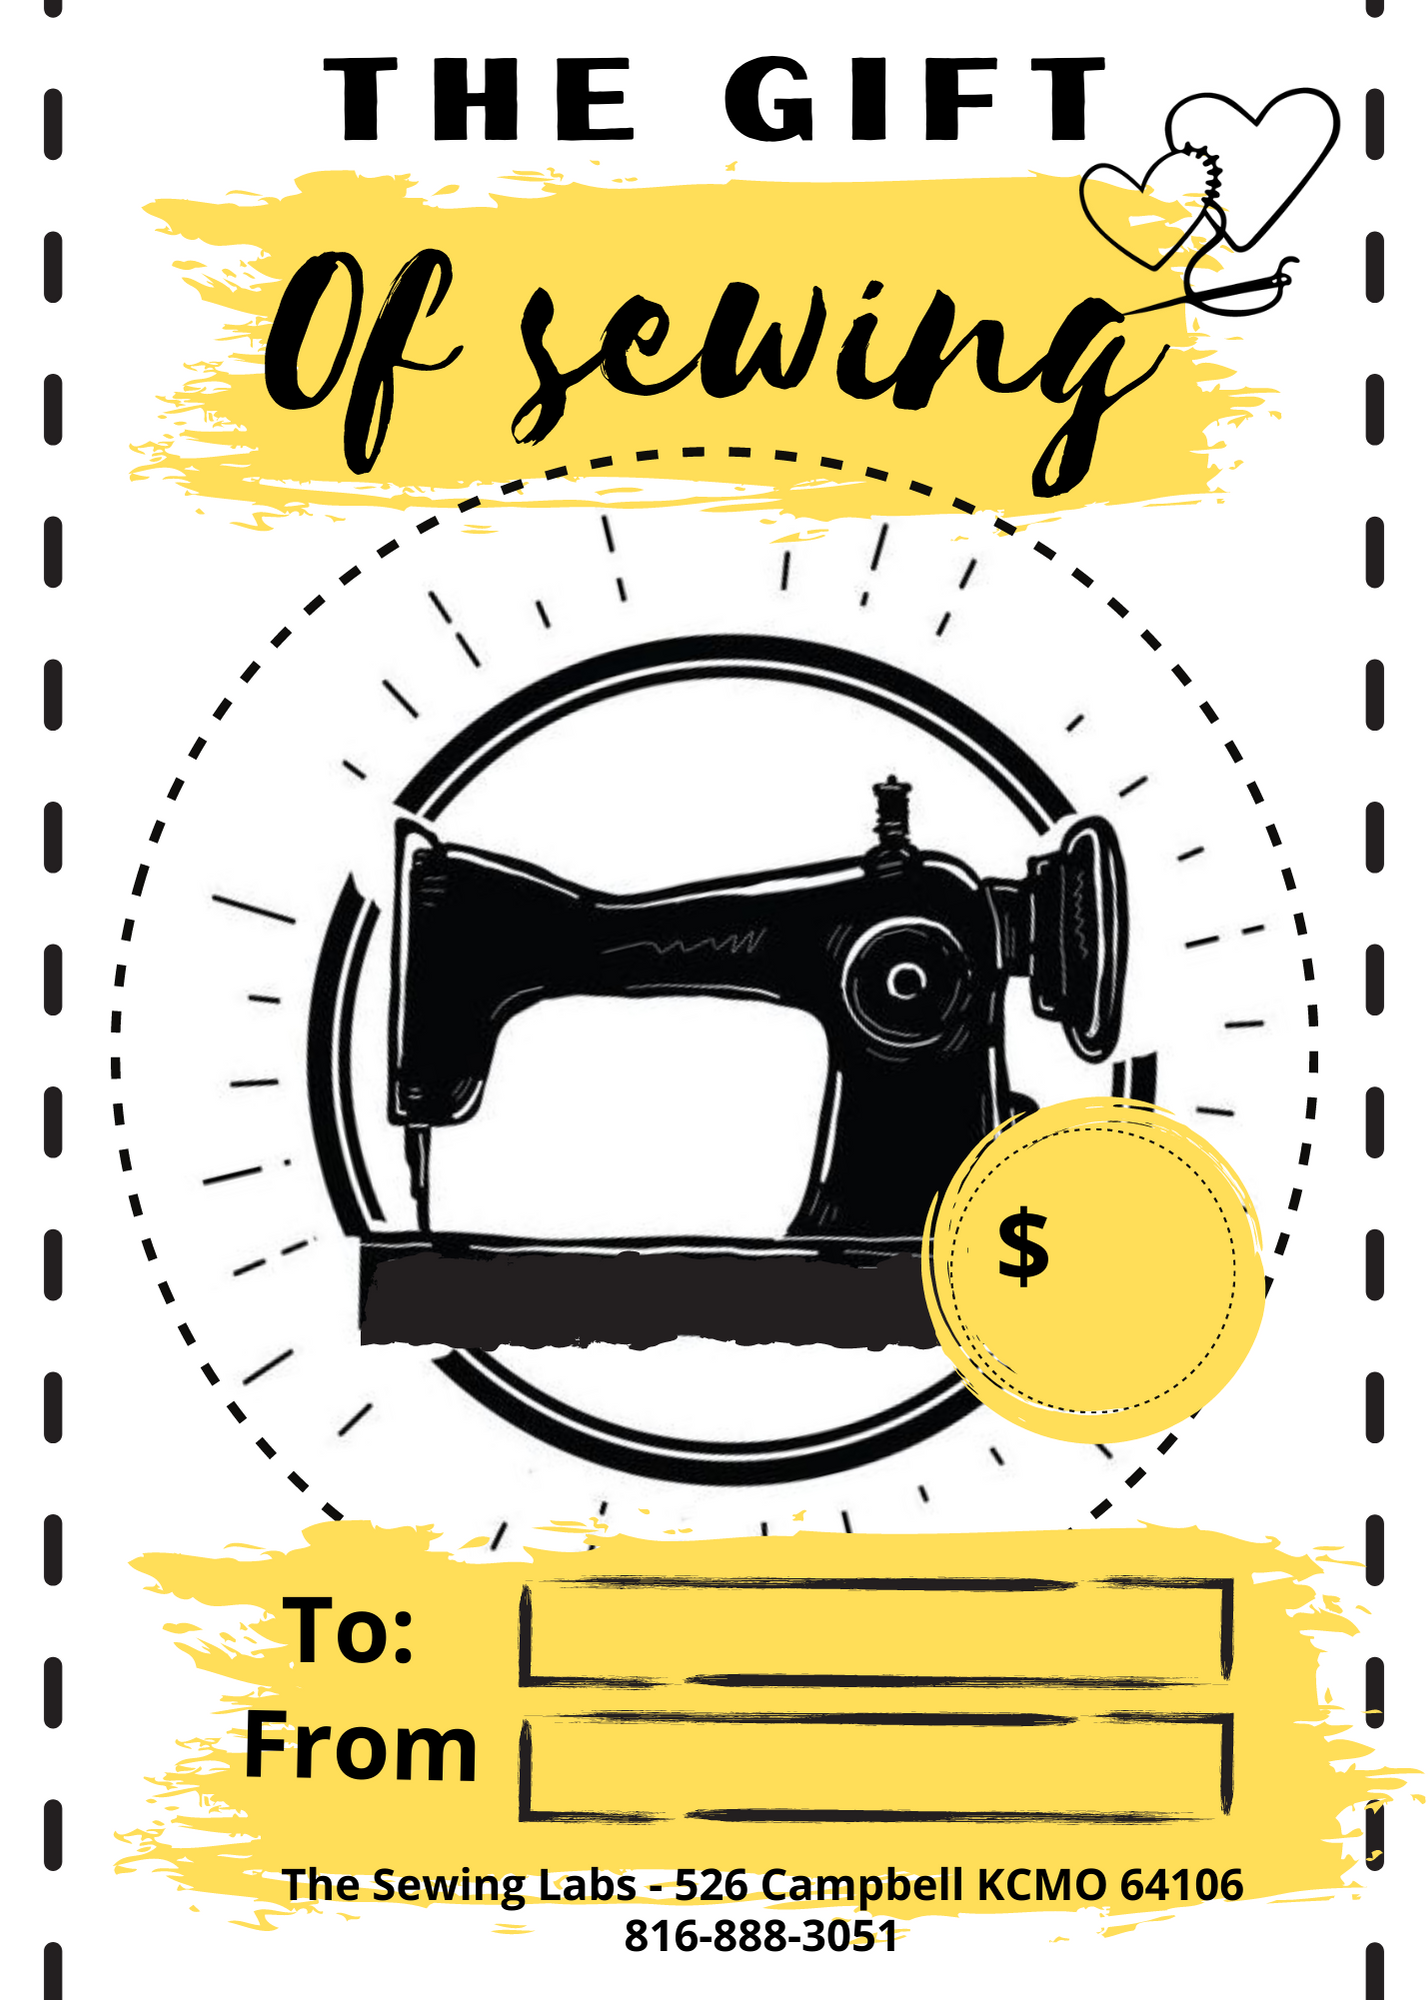 The Gift of Sewing - Gift Certificate - $100